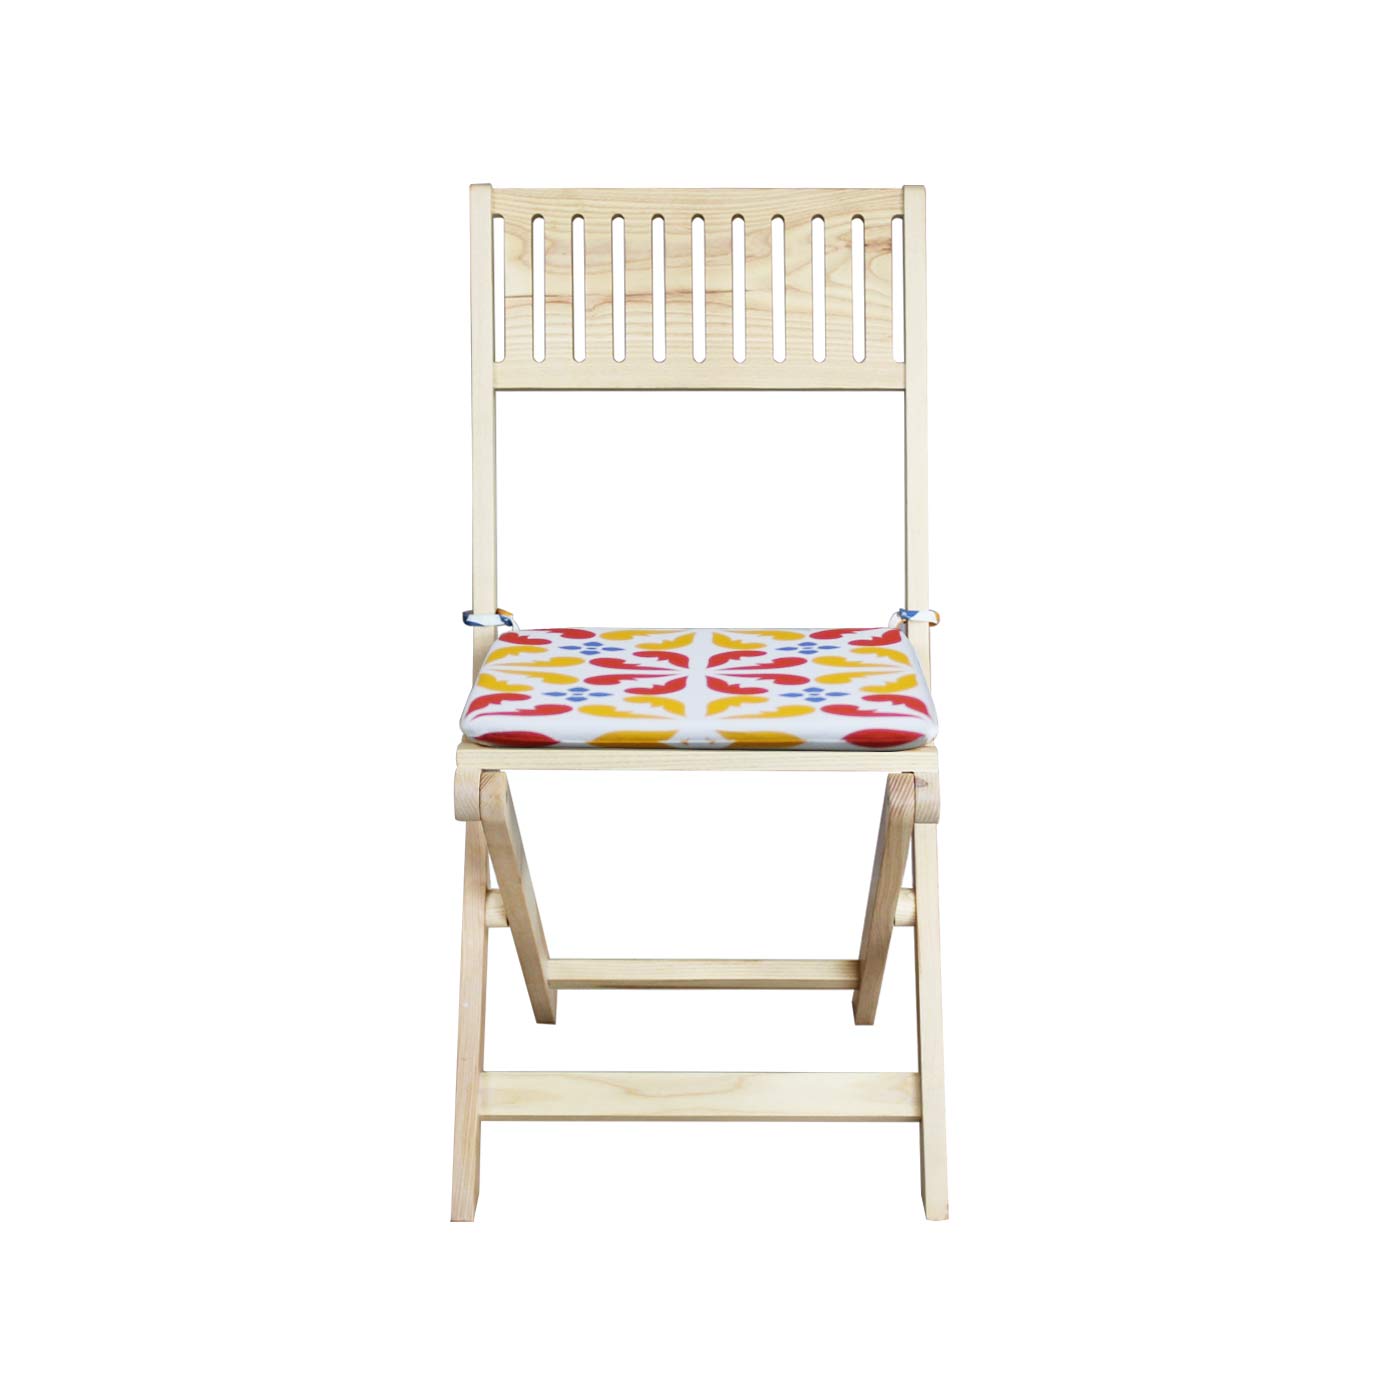 Palermo Yellow & Red Floral Patterned Light Folding Chair